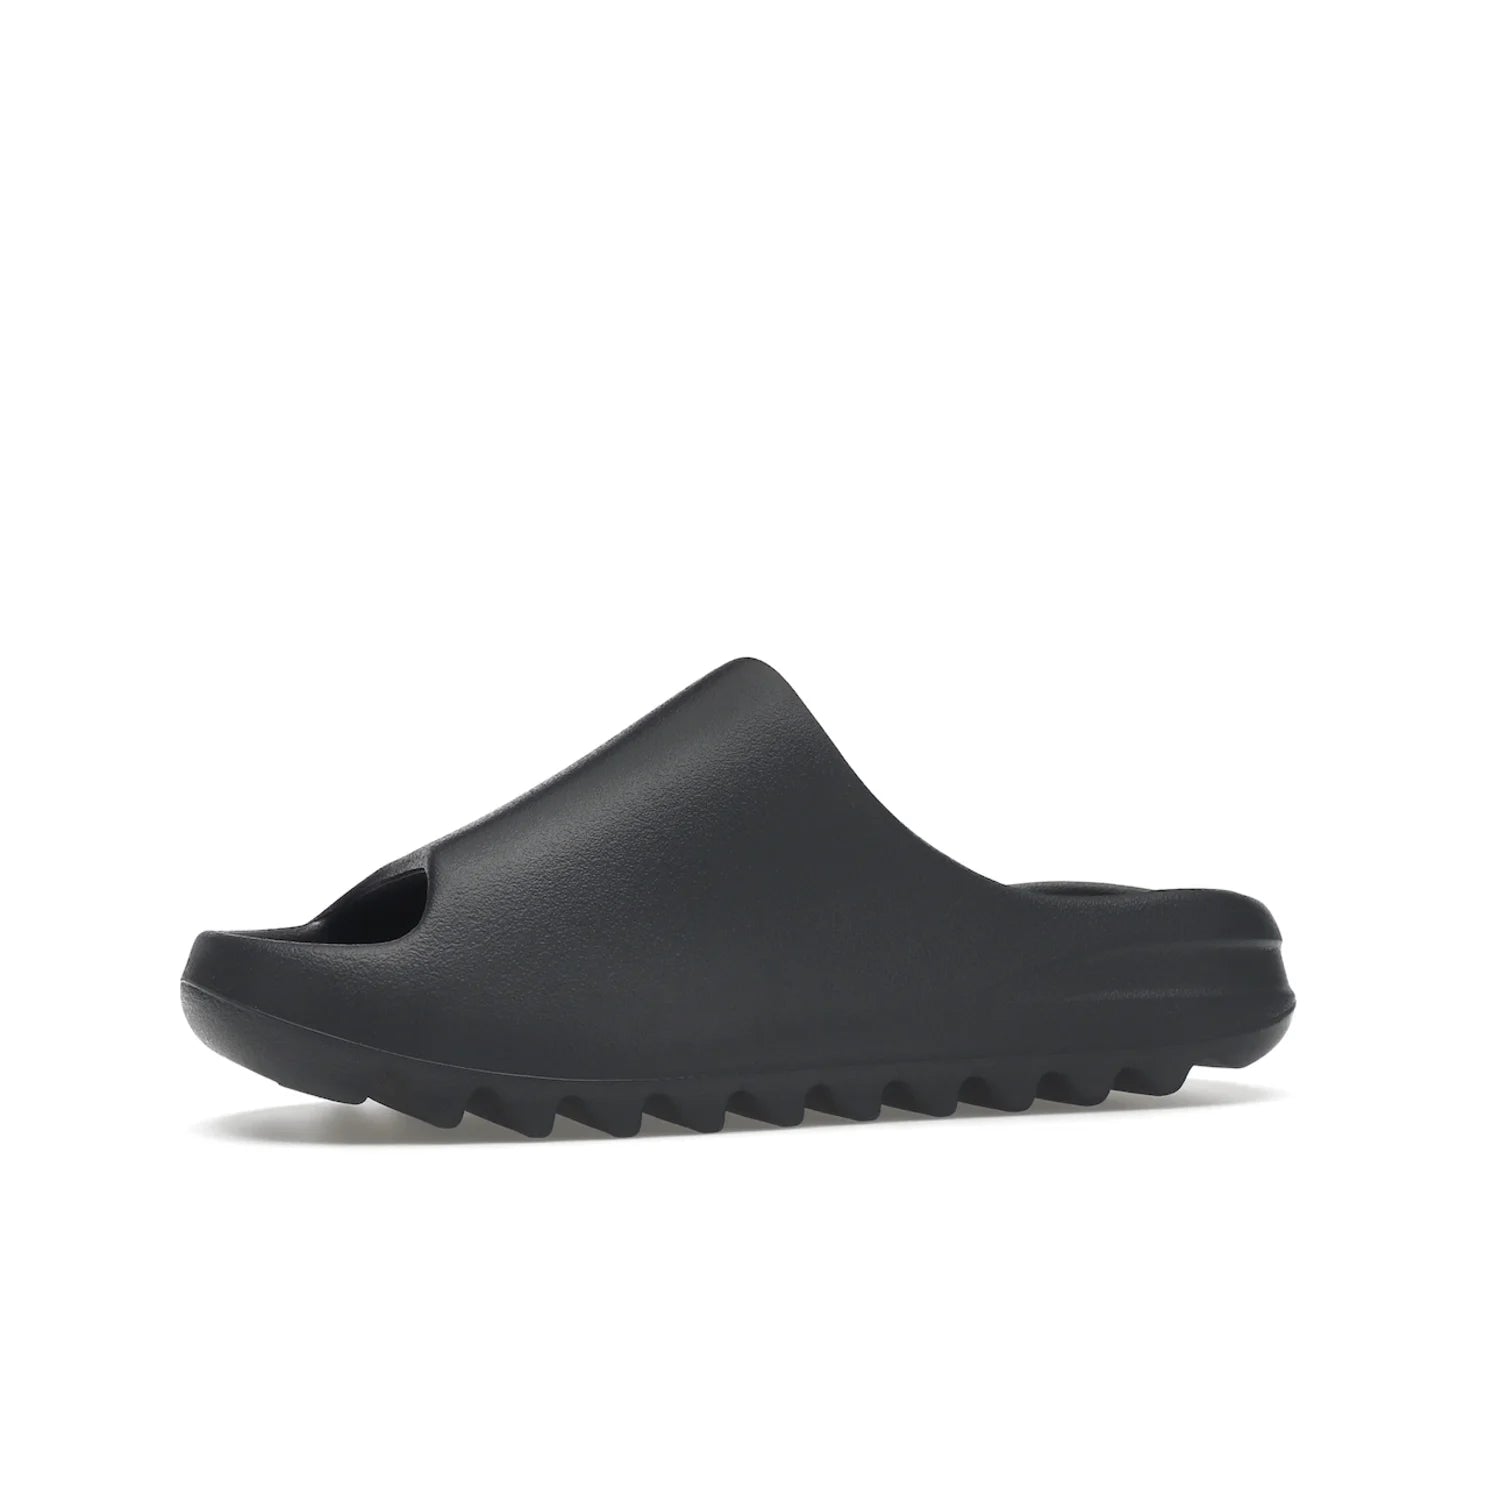 adidas Yeezy Slide Slate Grey - Image 17 - Only at www.BallersClubKickz.com - Stylish & comfortable adidas Yeezy Slide Slate Grey features an EVA foam upper, strategic cutouts, textured outsole pattern, & easy slip-on design for modern comfort & classic style.